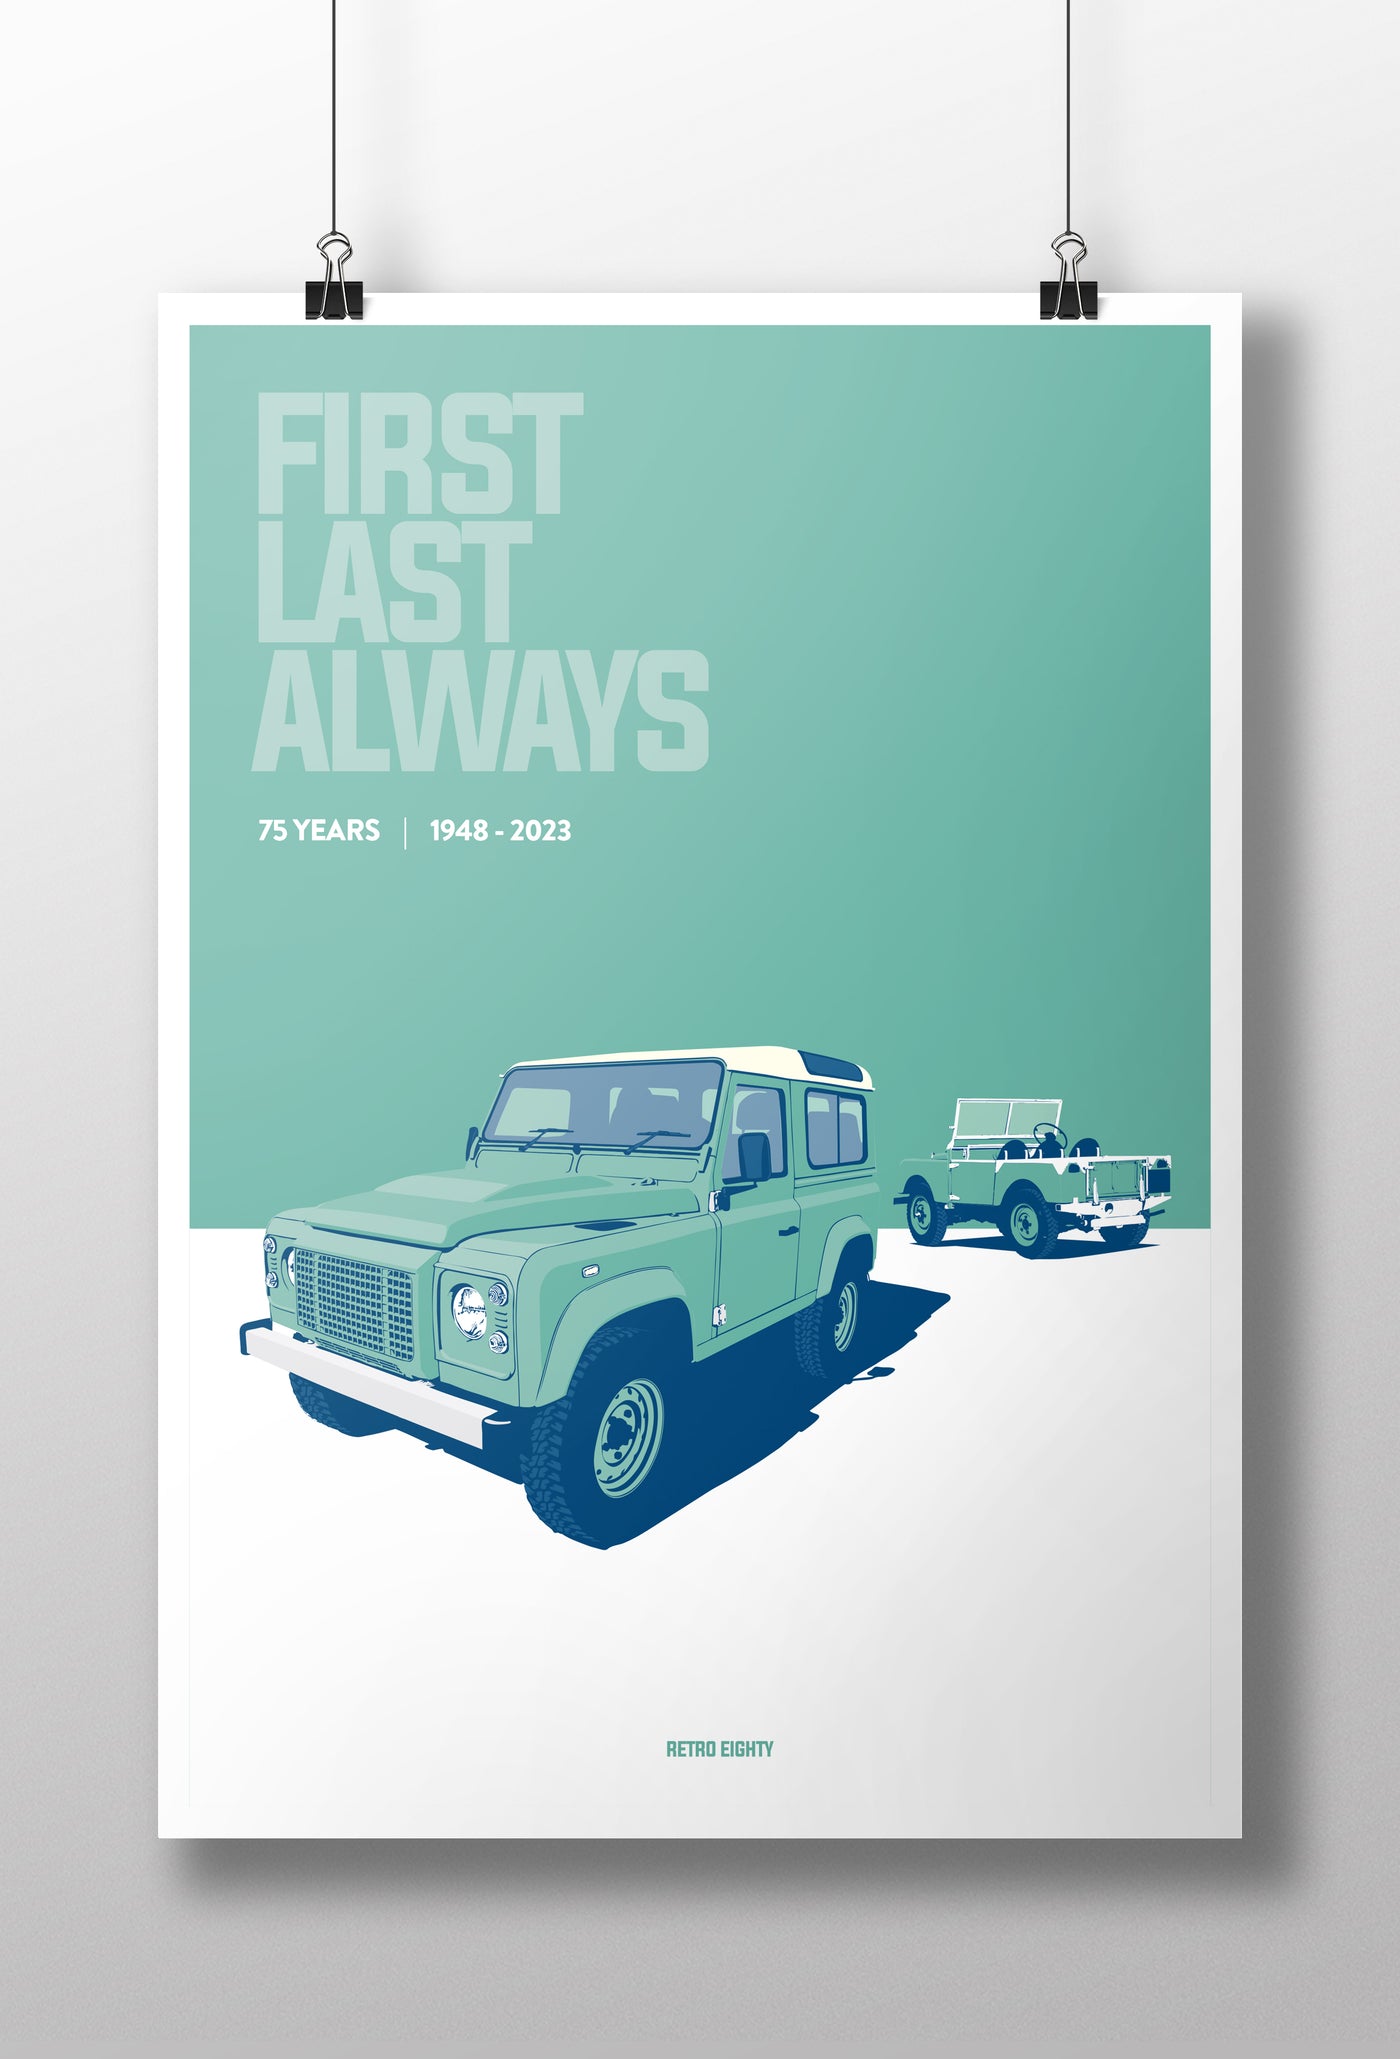 'First Last Always' 75 years poster